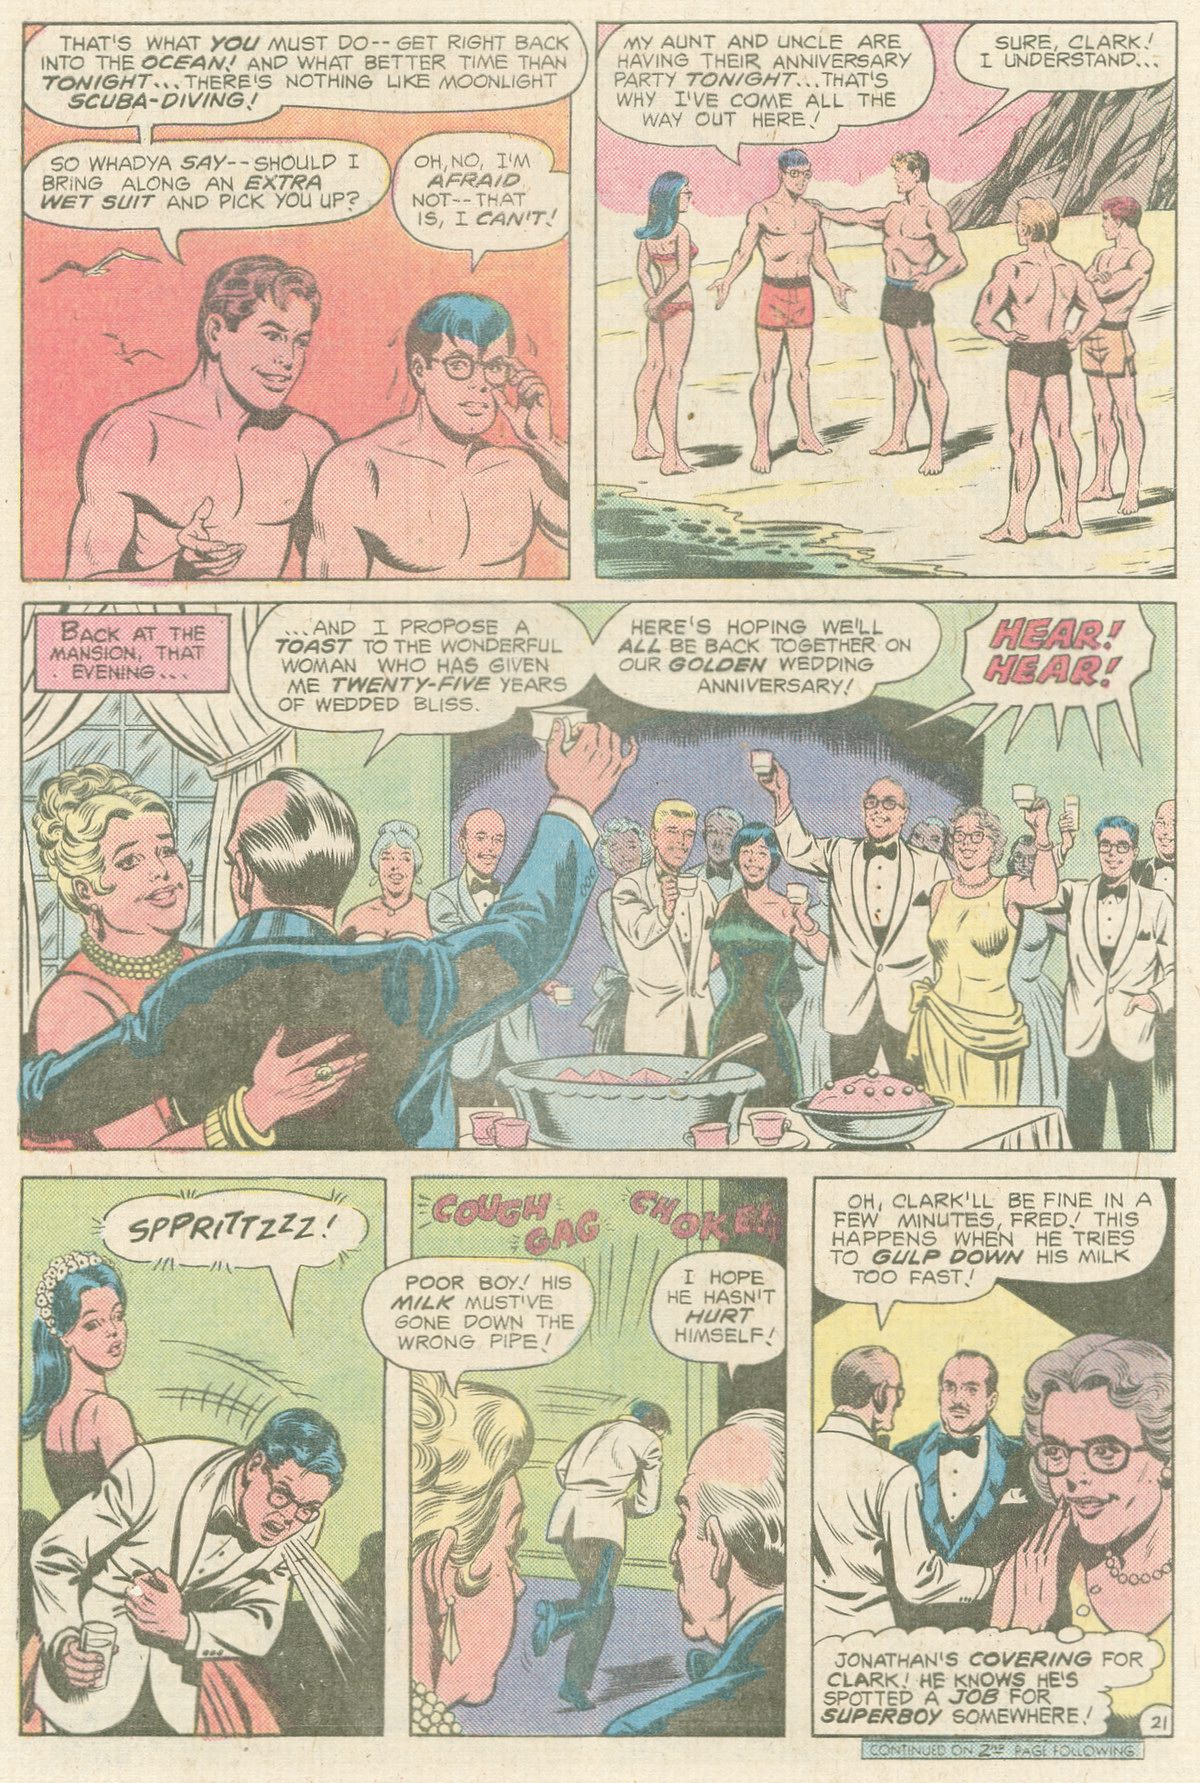 The New Adventures of Superboy 13 Page 21